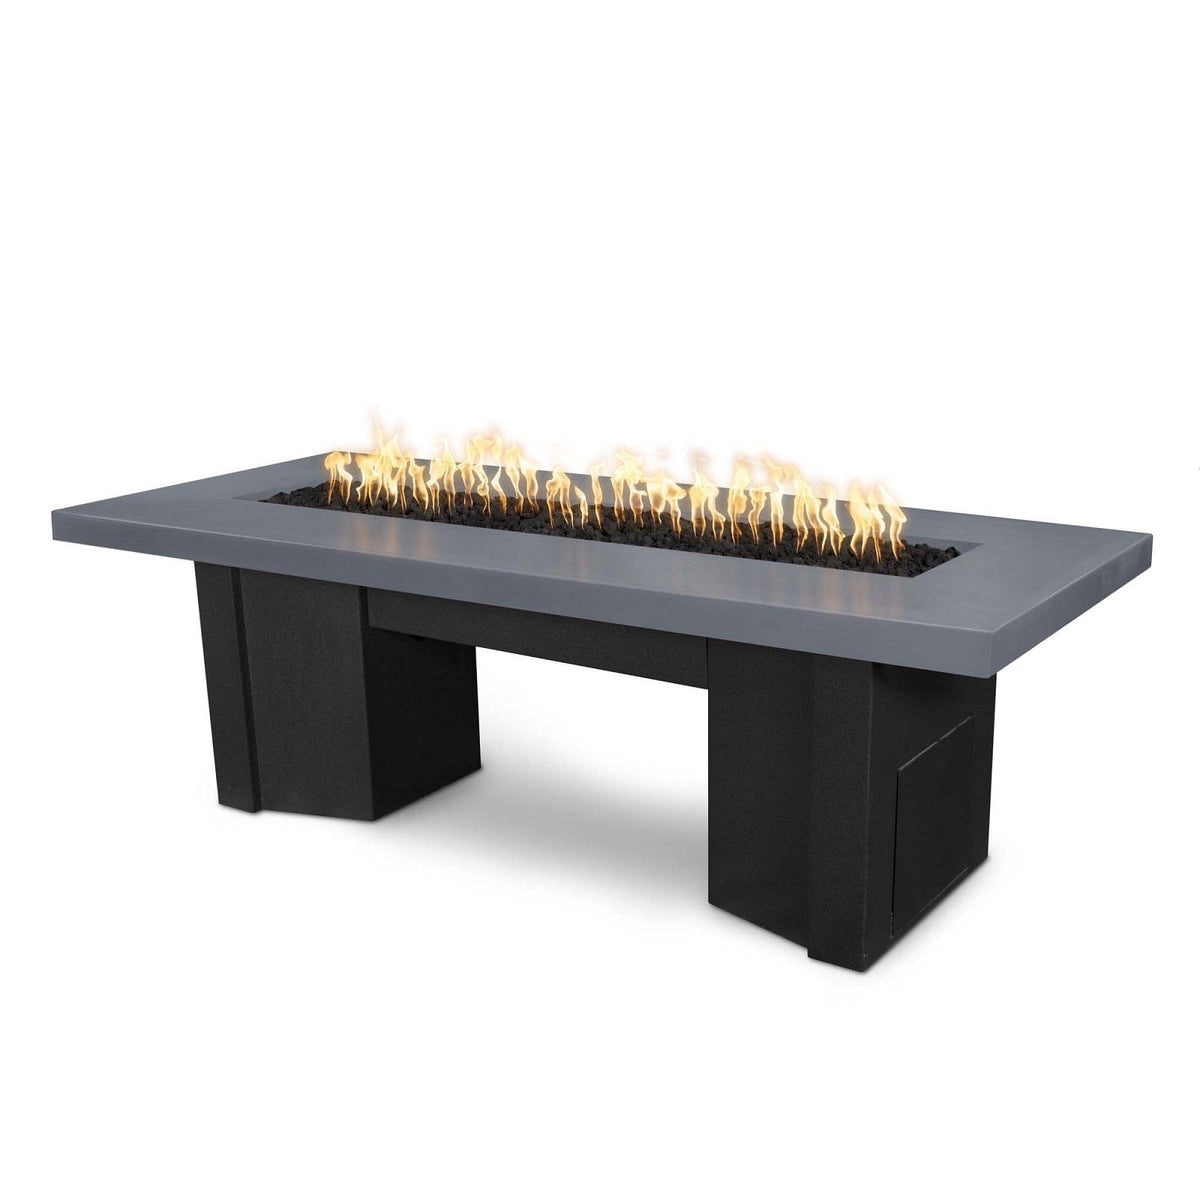 The Outdoor Plus Fire Features Gray (-GRY) / Black Powder Coated Steel (-BLK) The Outdoor Plus 78&quot; Alameda Fire Table Smooth Concrete in Liquid Propane - Match Lit with Flame Sense System / OPT-ALMGFRC78FSML-LP